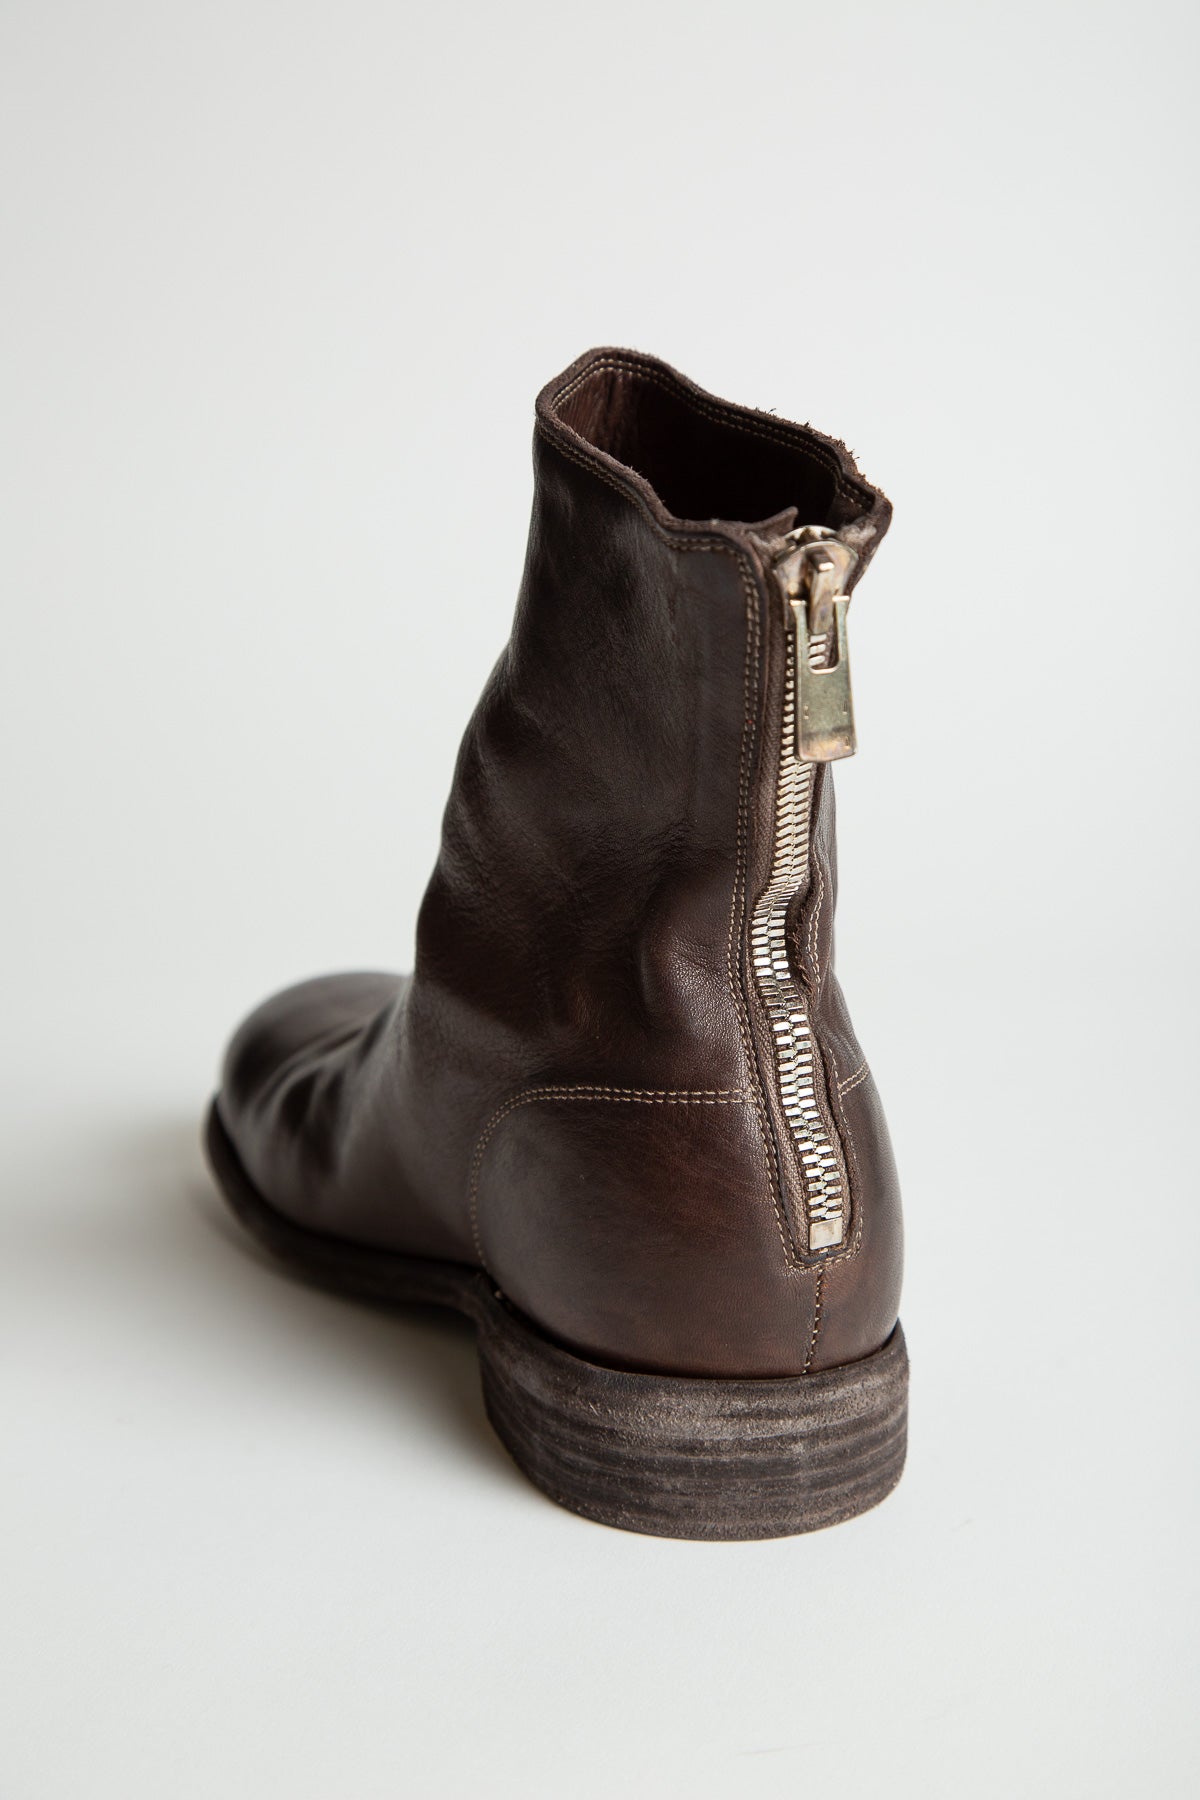 GUIDI | 986 BACK ZIP BOOTS